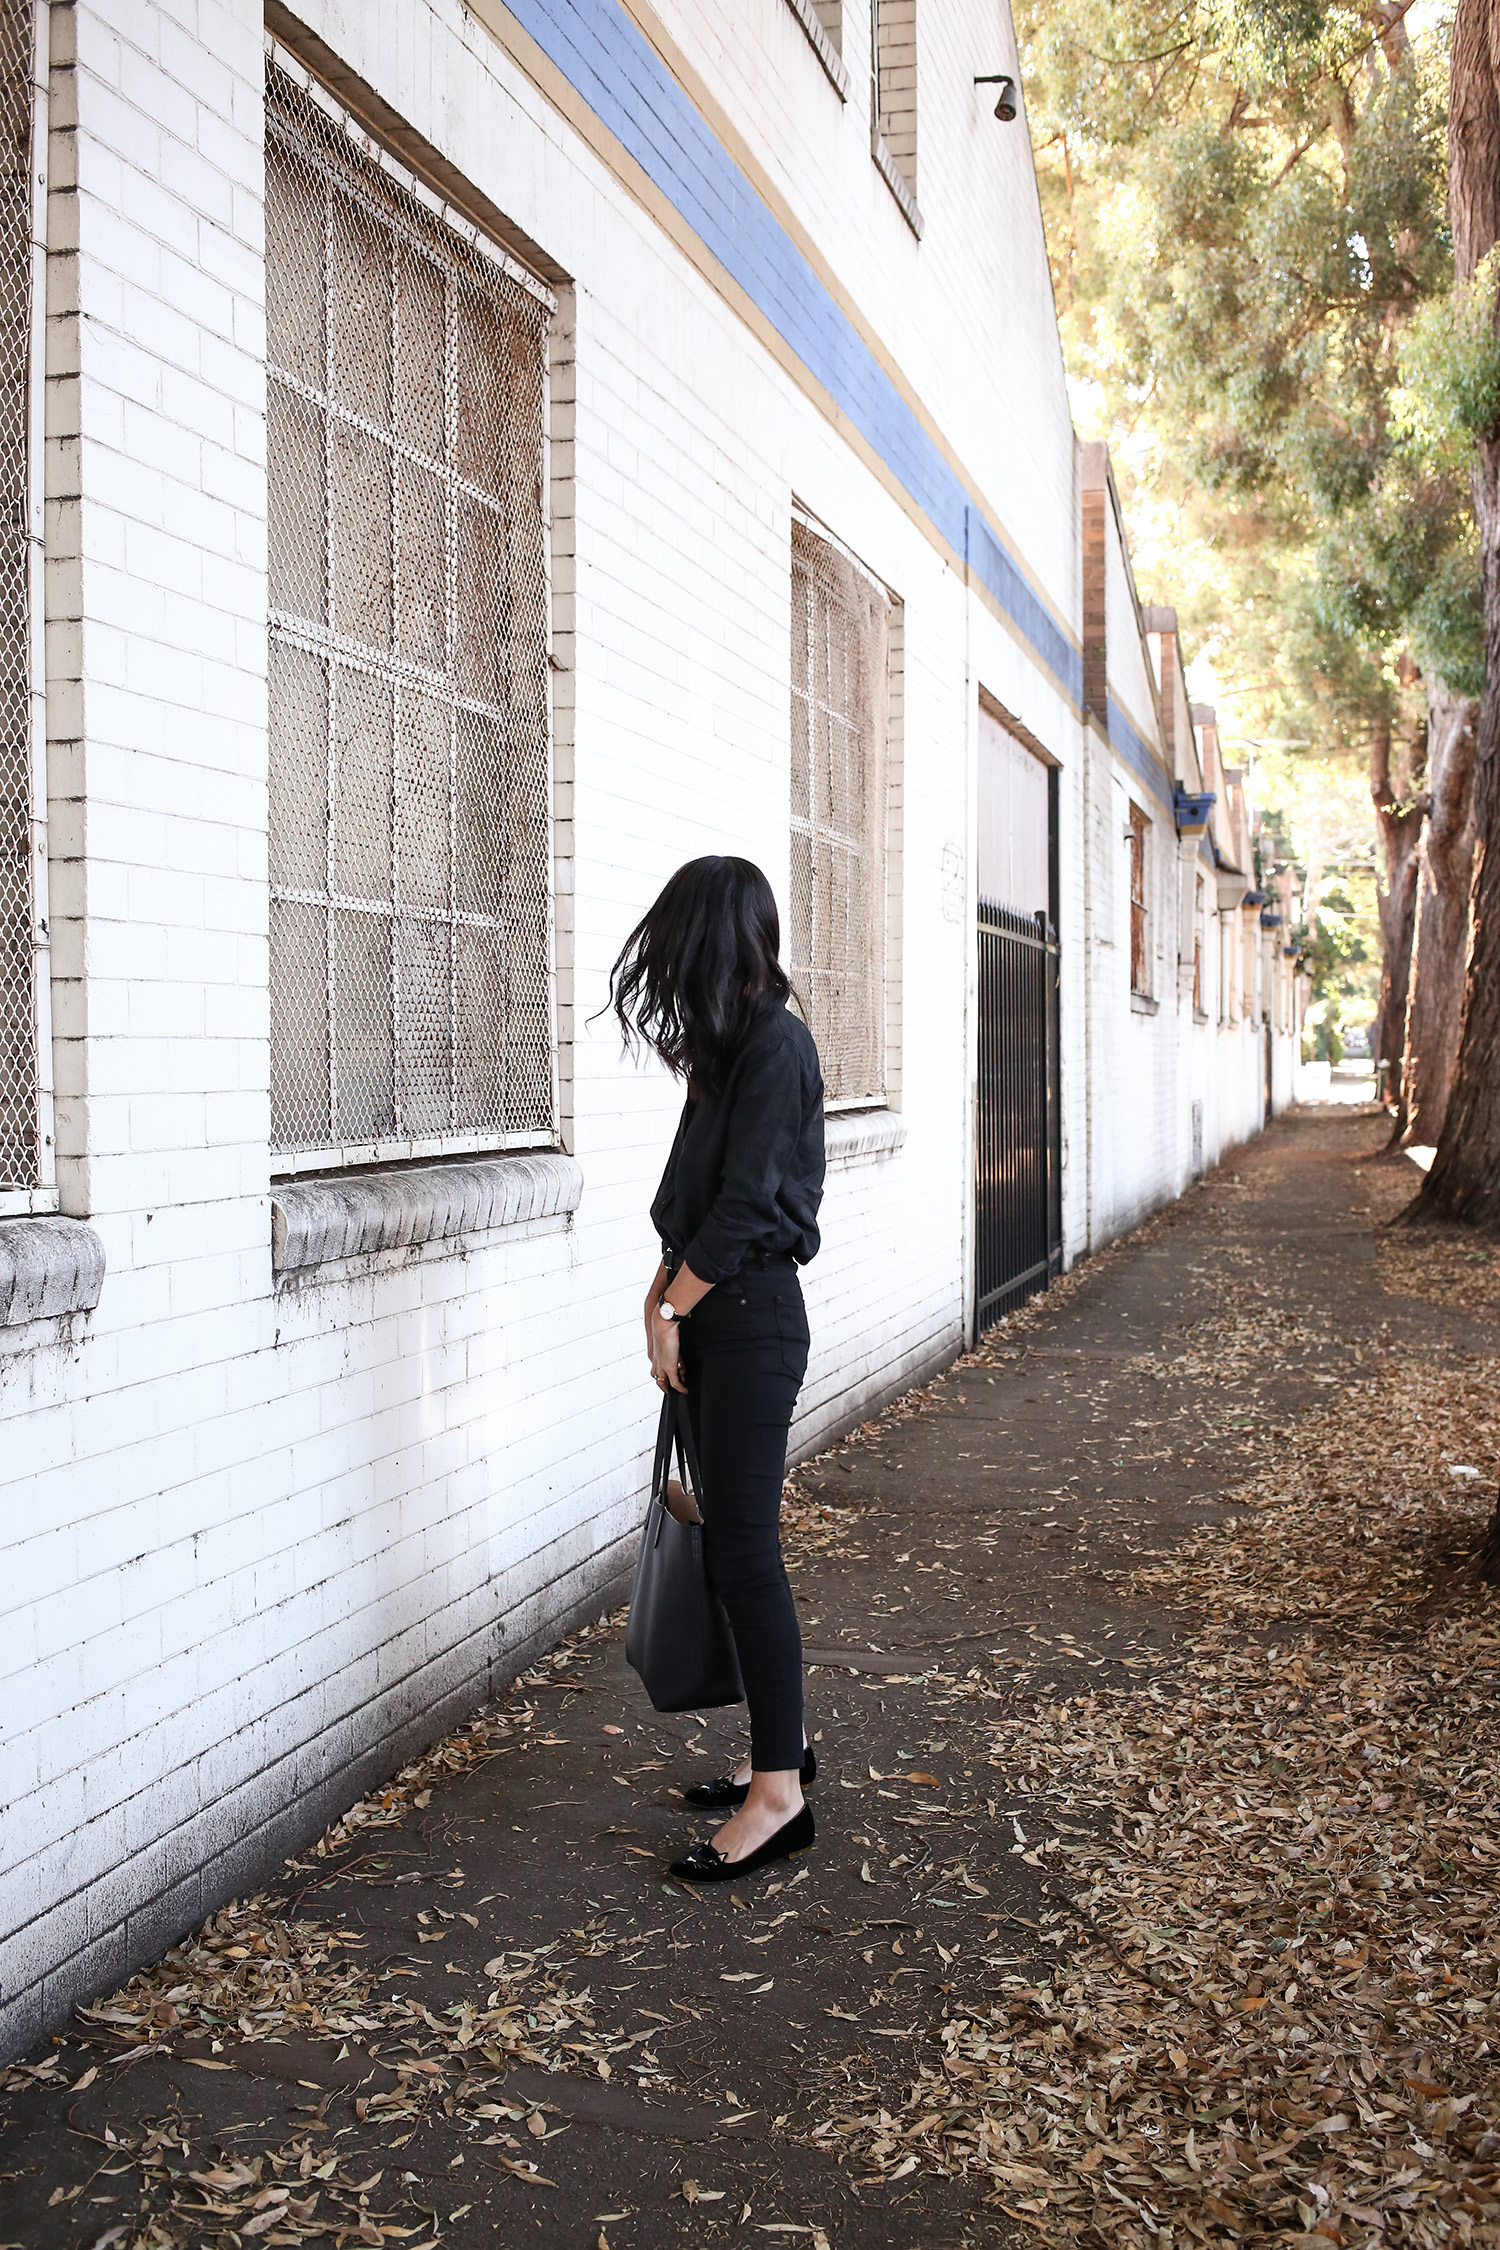 Jamie Lee of Mademoiselle wearing an all black minimal style outfit